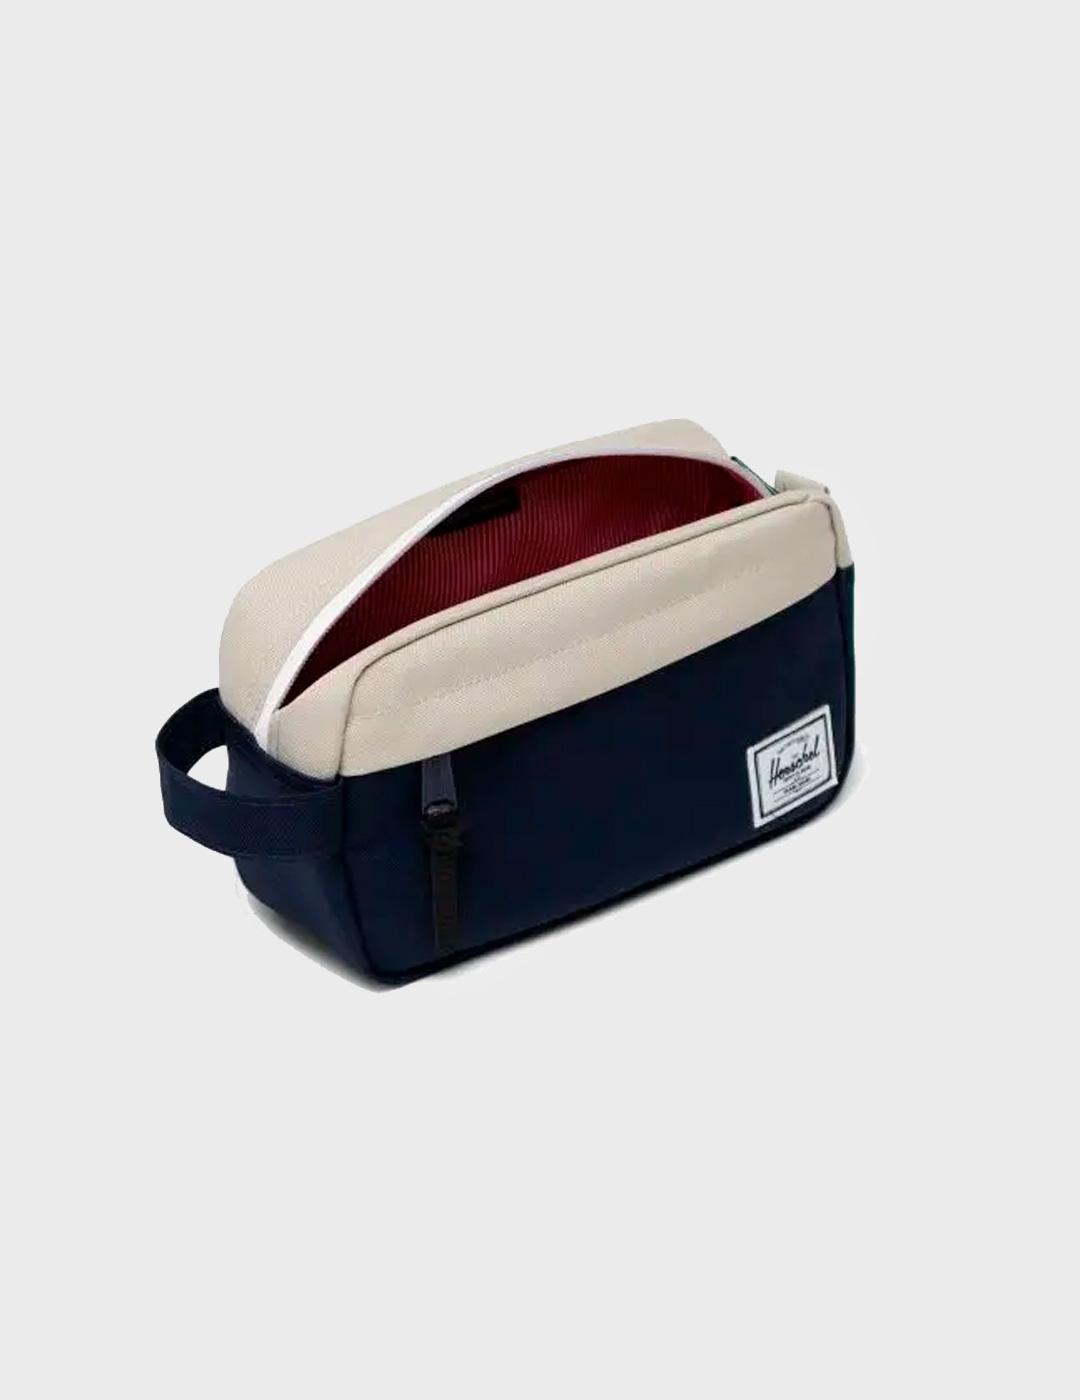 Neceser Herschell Carry On marino para hombre y mujer